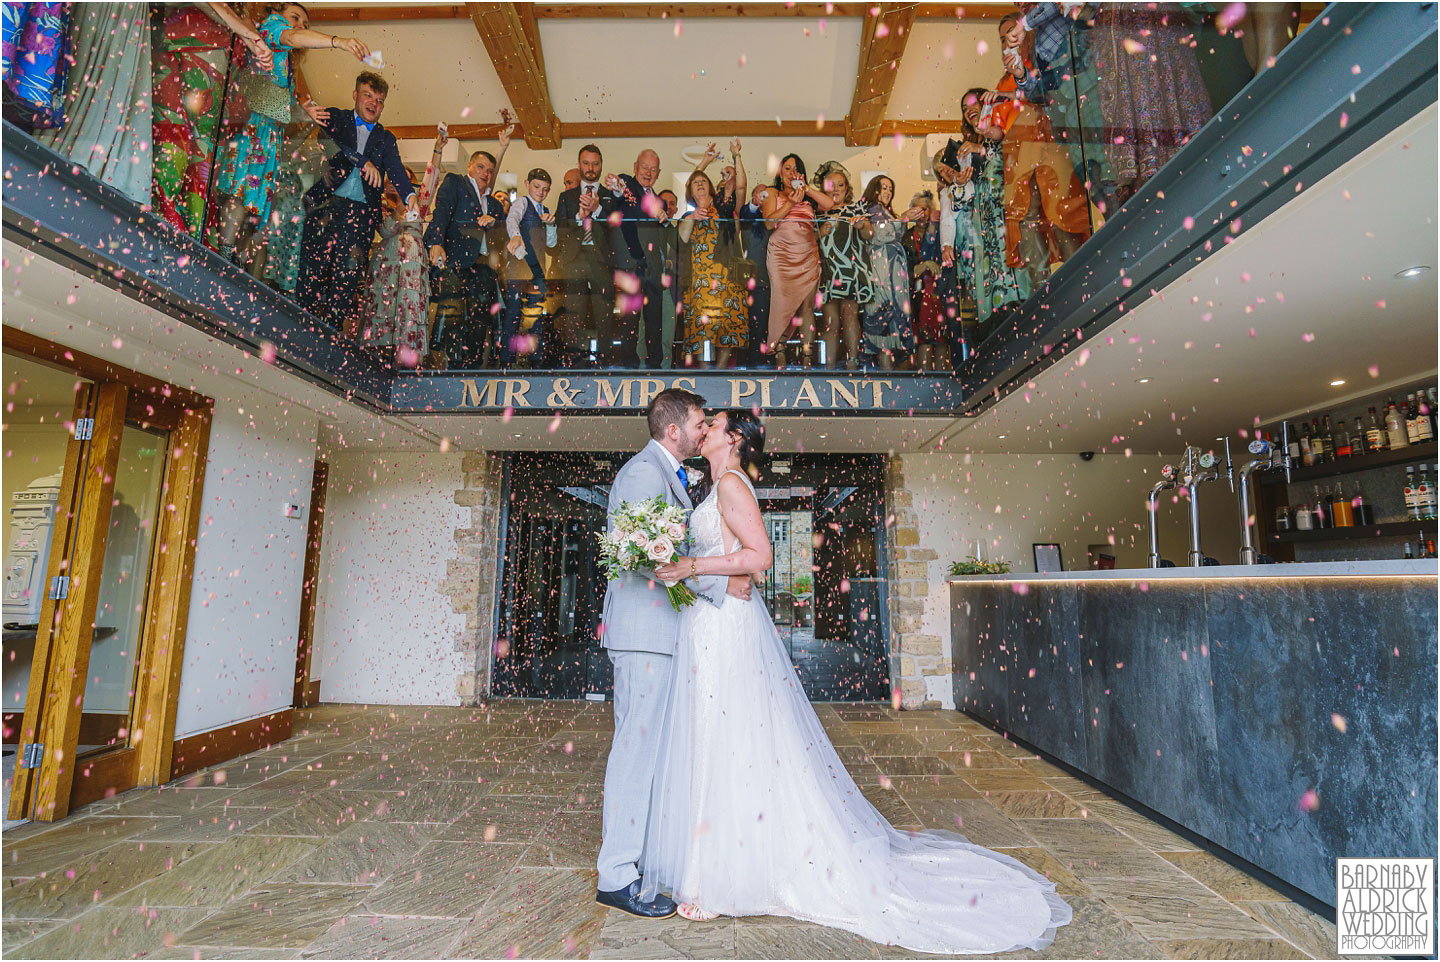 Priory Cottages Wedding Photos, Confetti at Priory Cottages, Priory Barn Yorkshire Wedding Photographer, Priory Cottages Wedding, Priory Farm and Cottages Wedding, Yorkshire Wedding Photographer